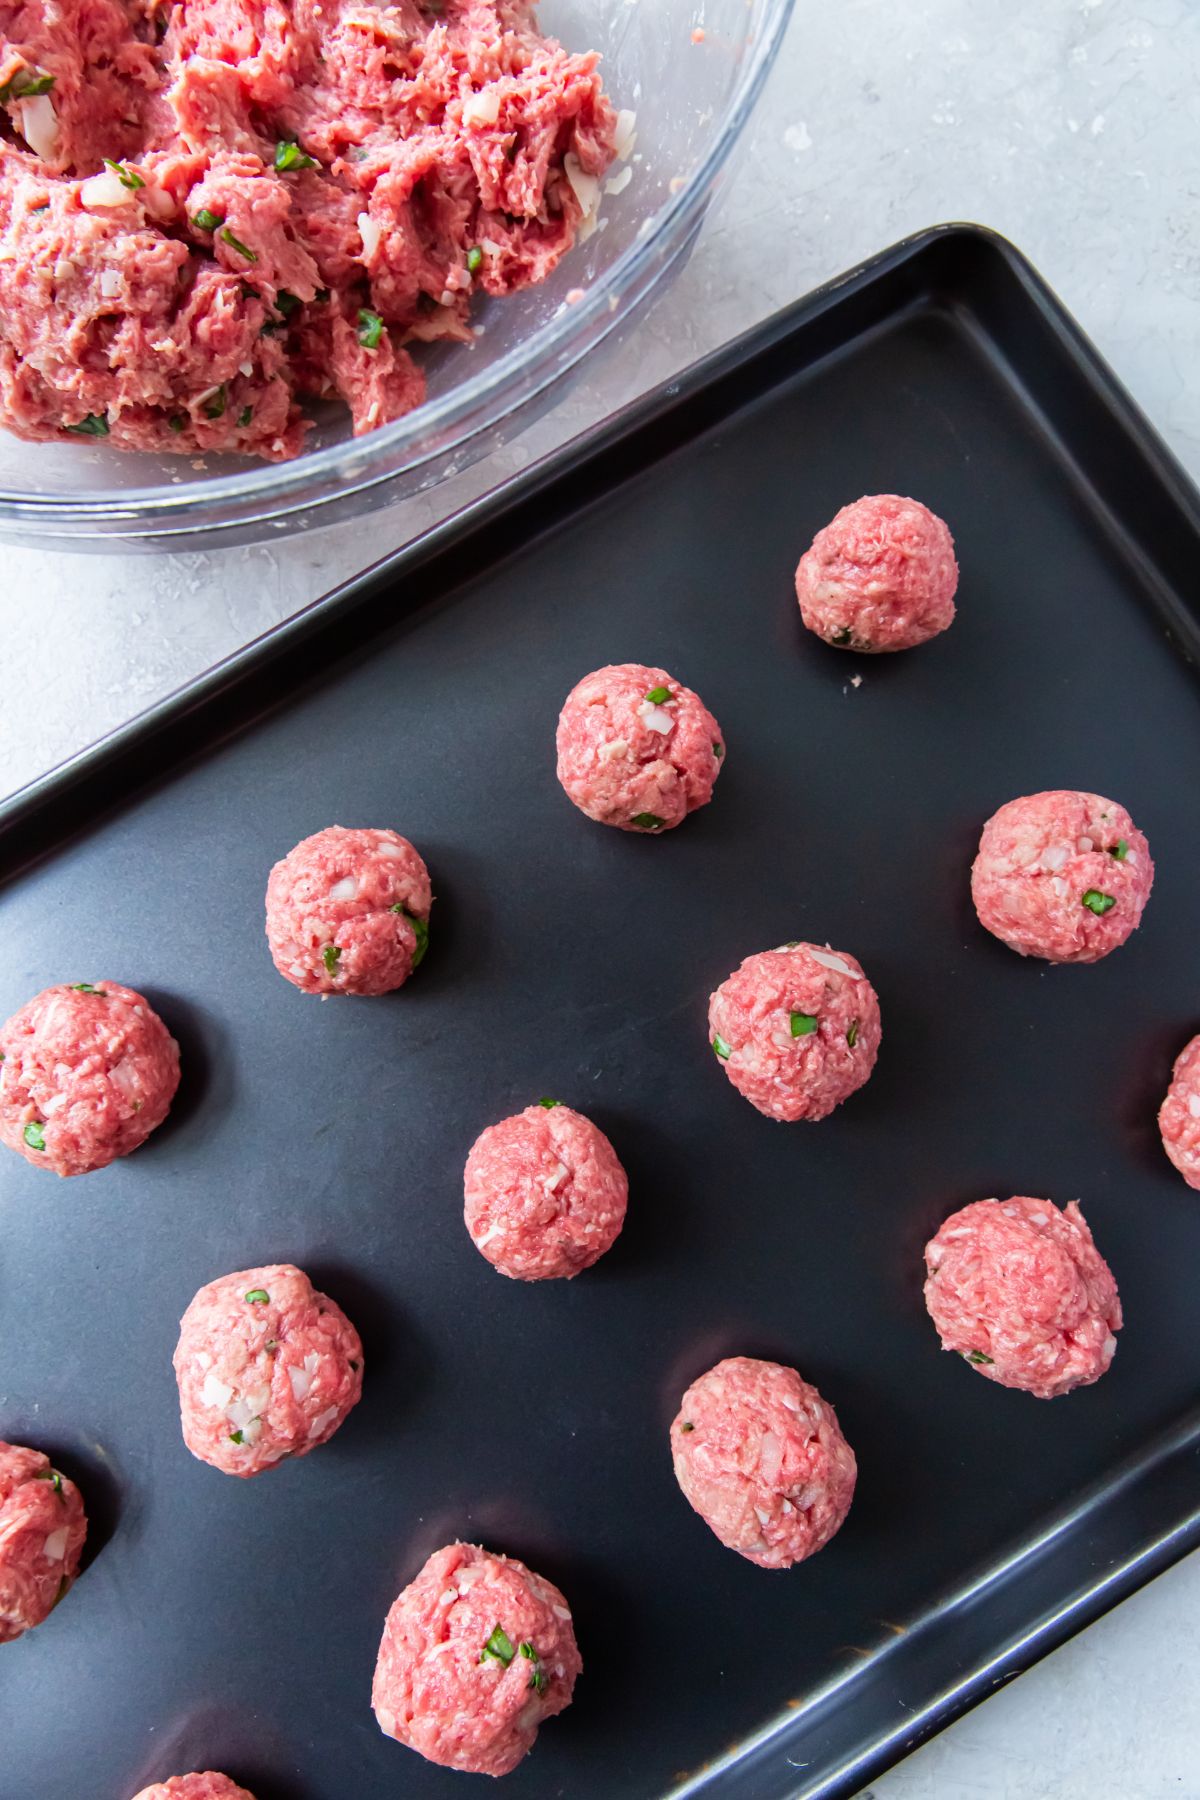 two inch meatballs neatly organized in rows of four on a black baking sheet.